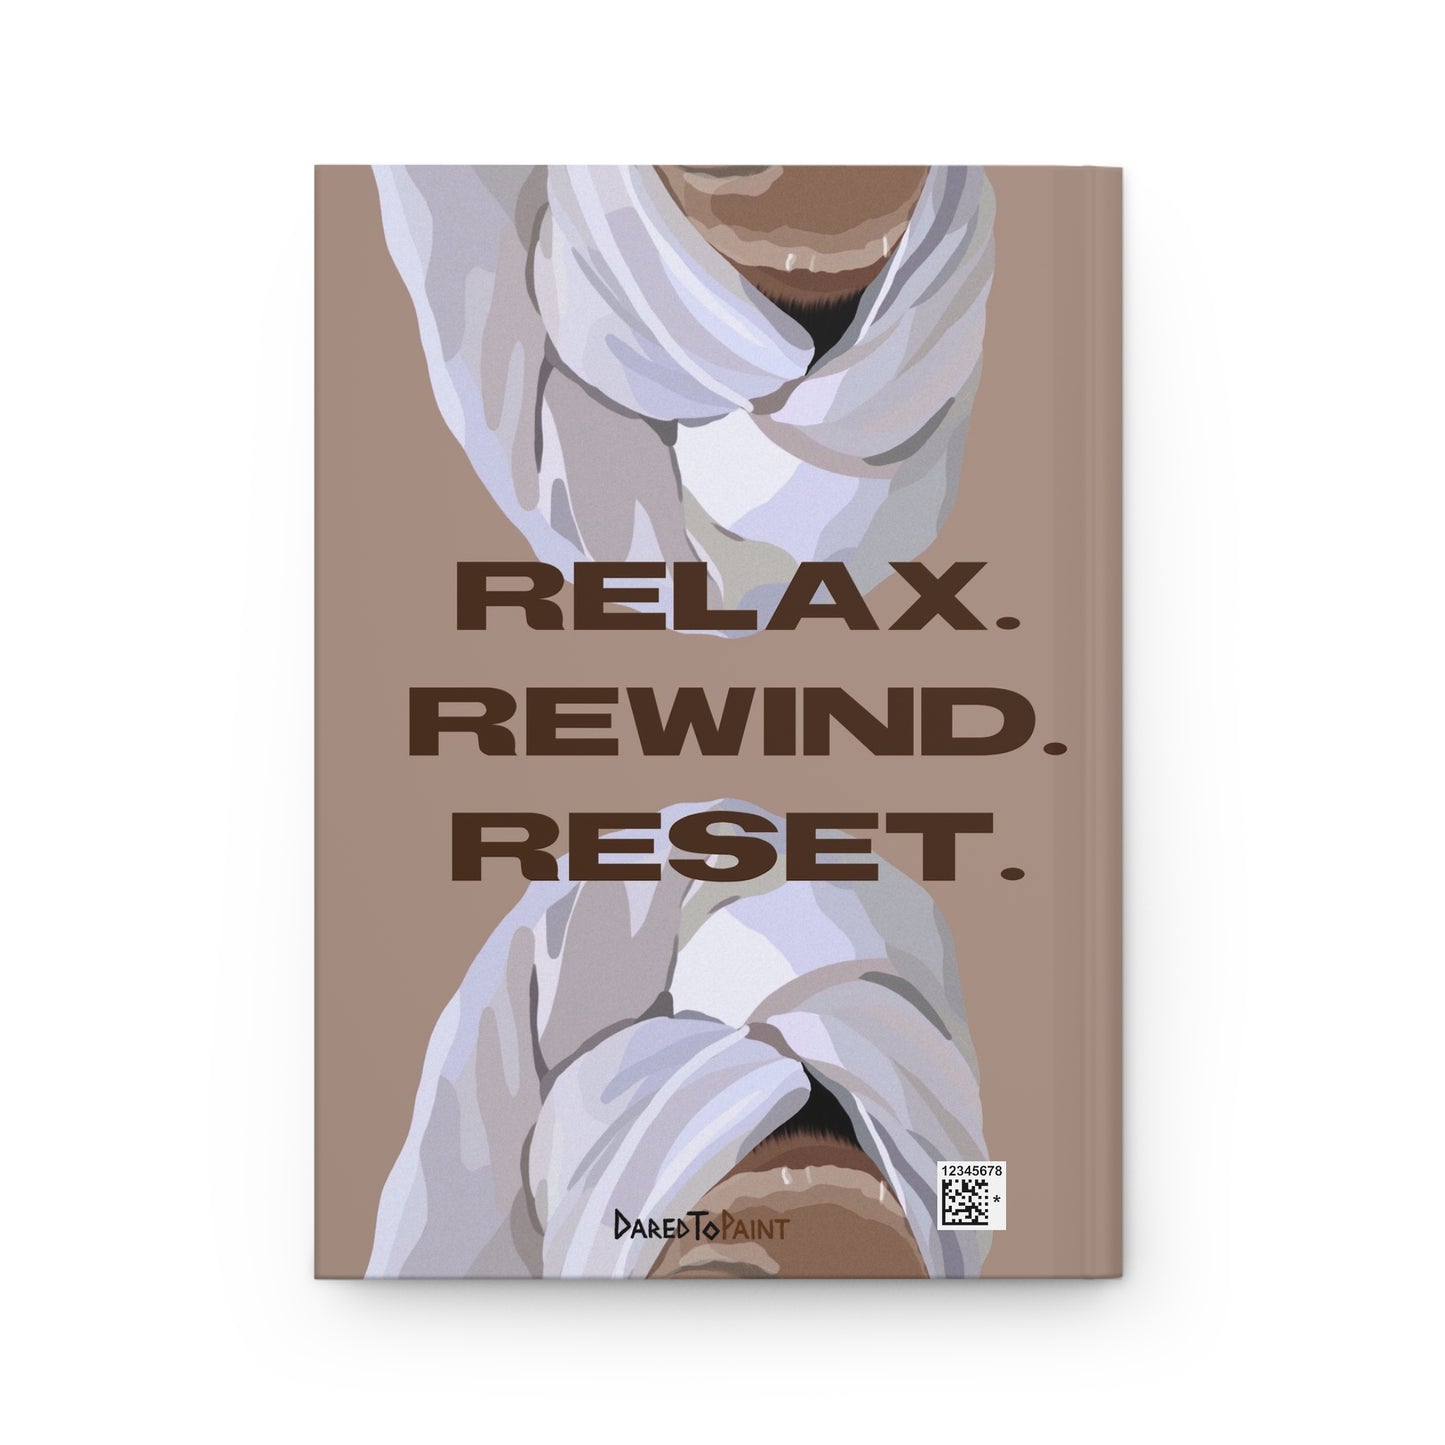 “Please Relax” Journal